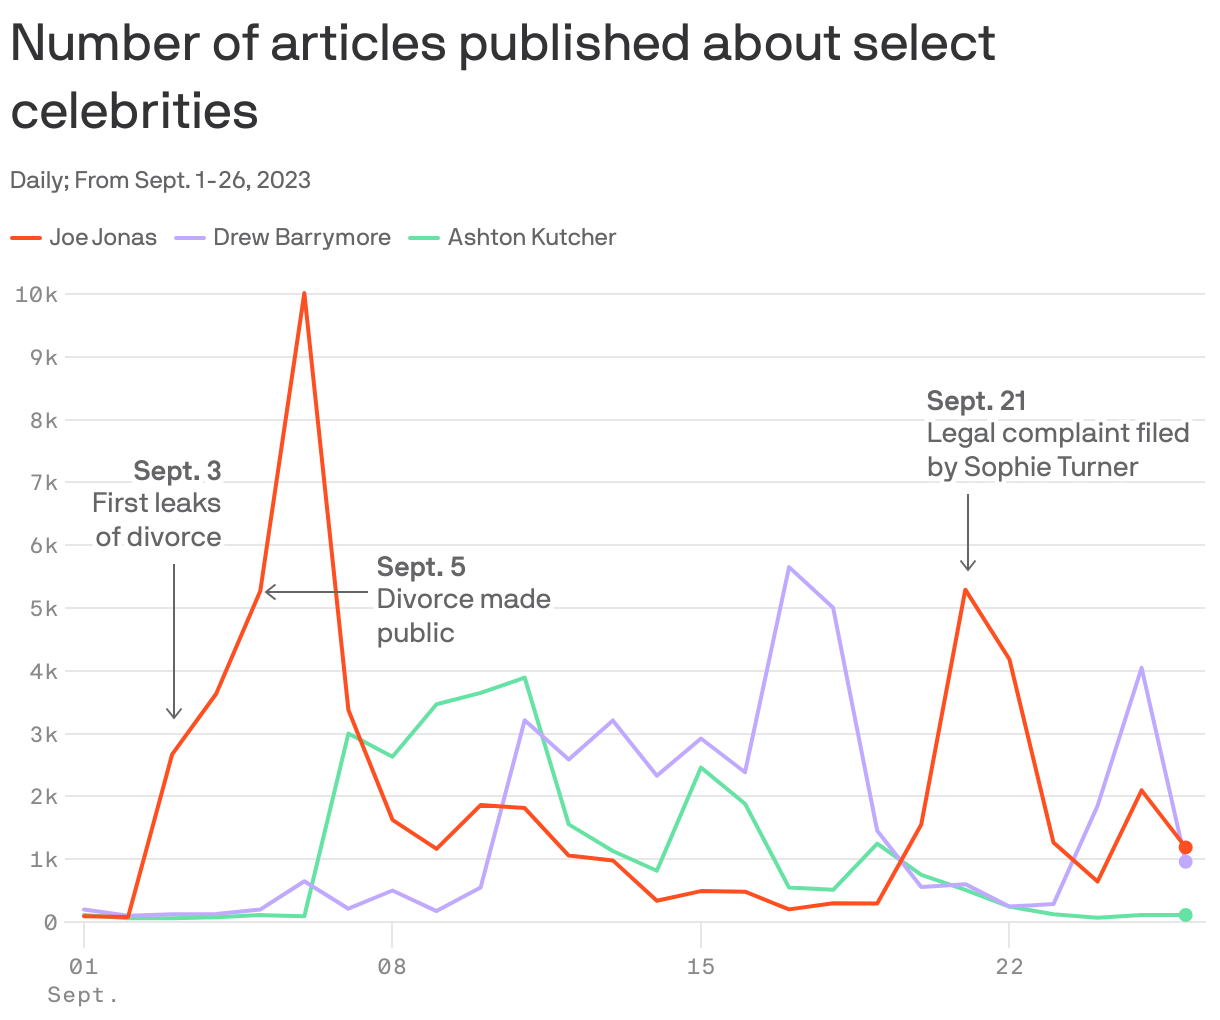 Number of articles published about select celebrities